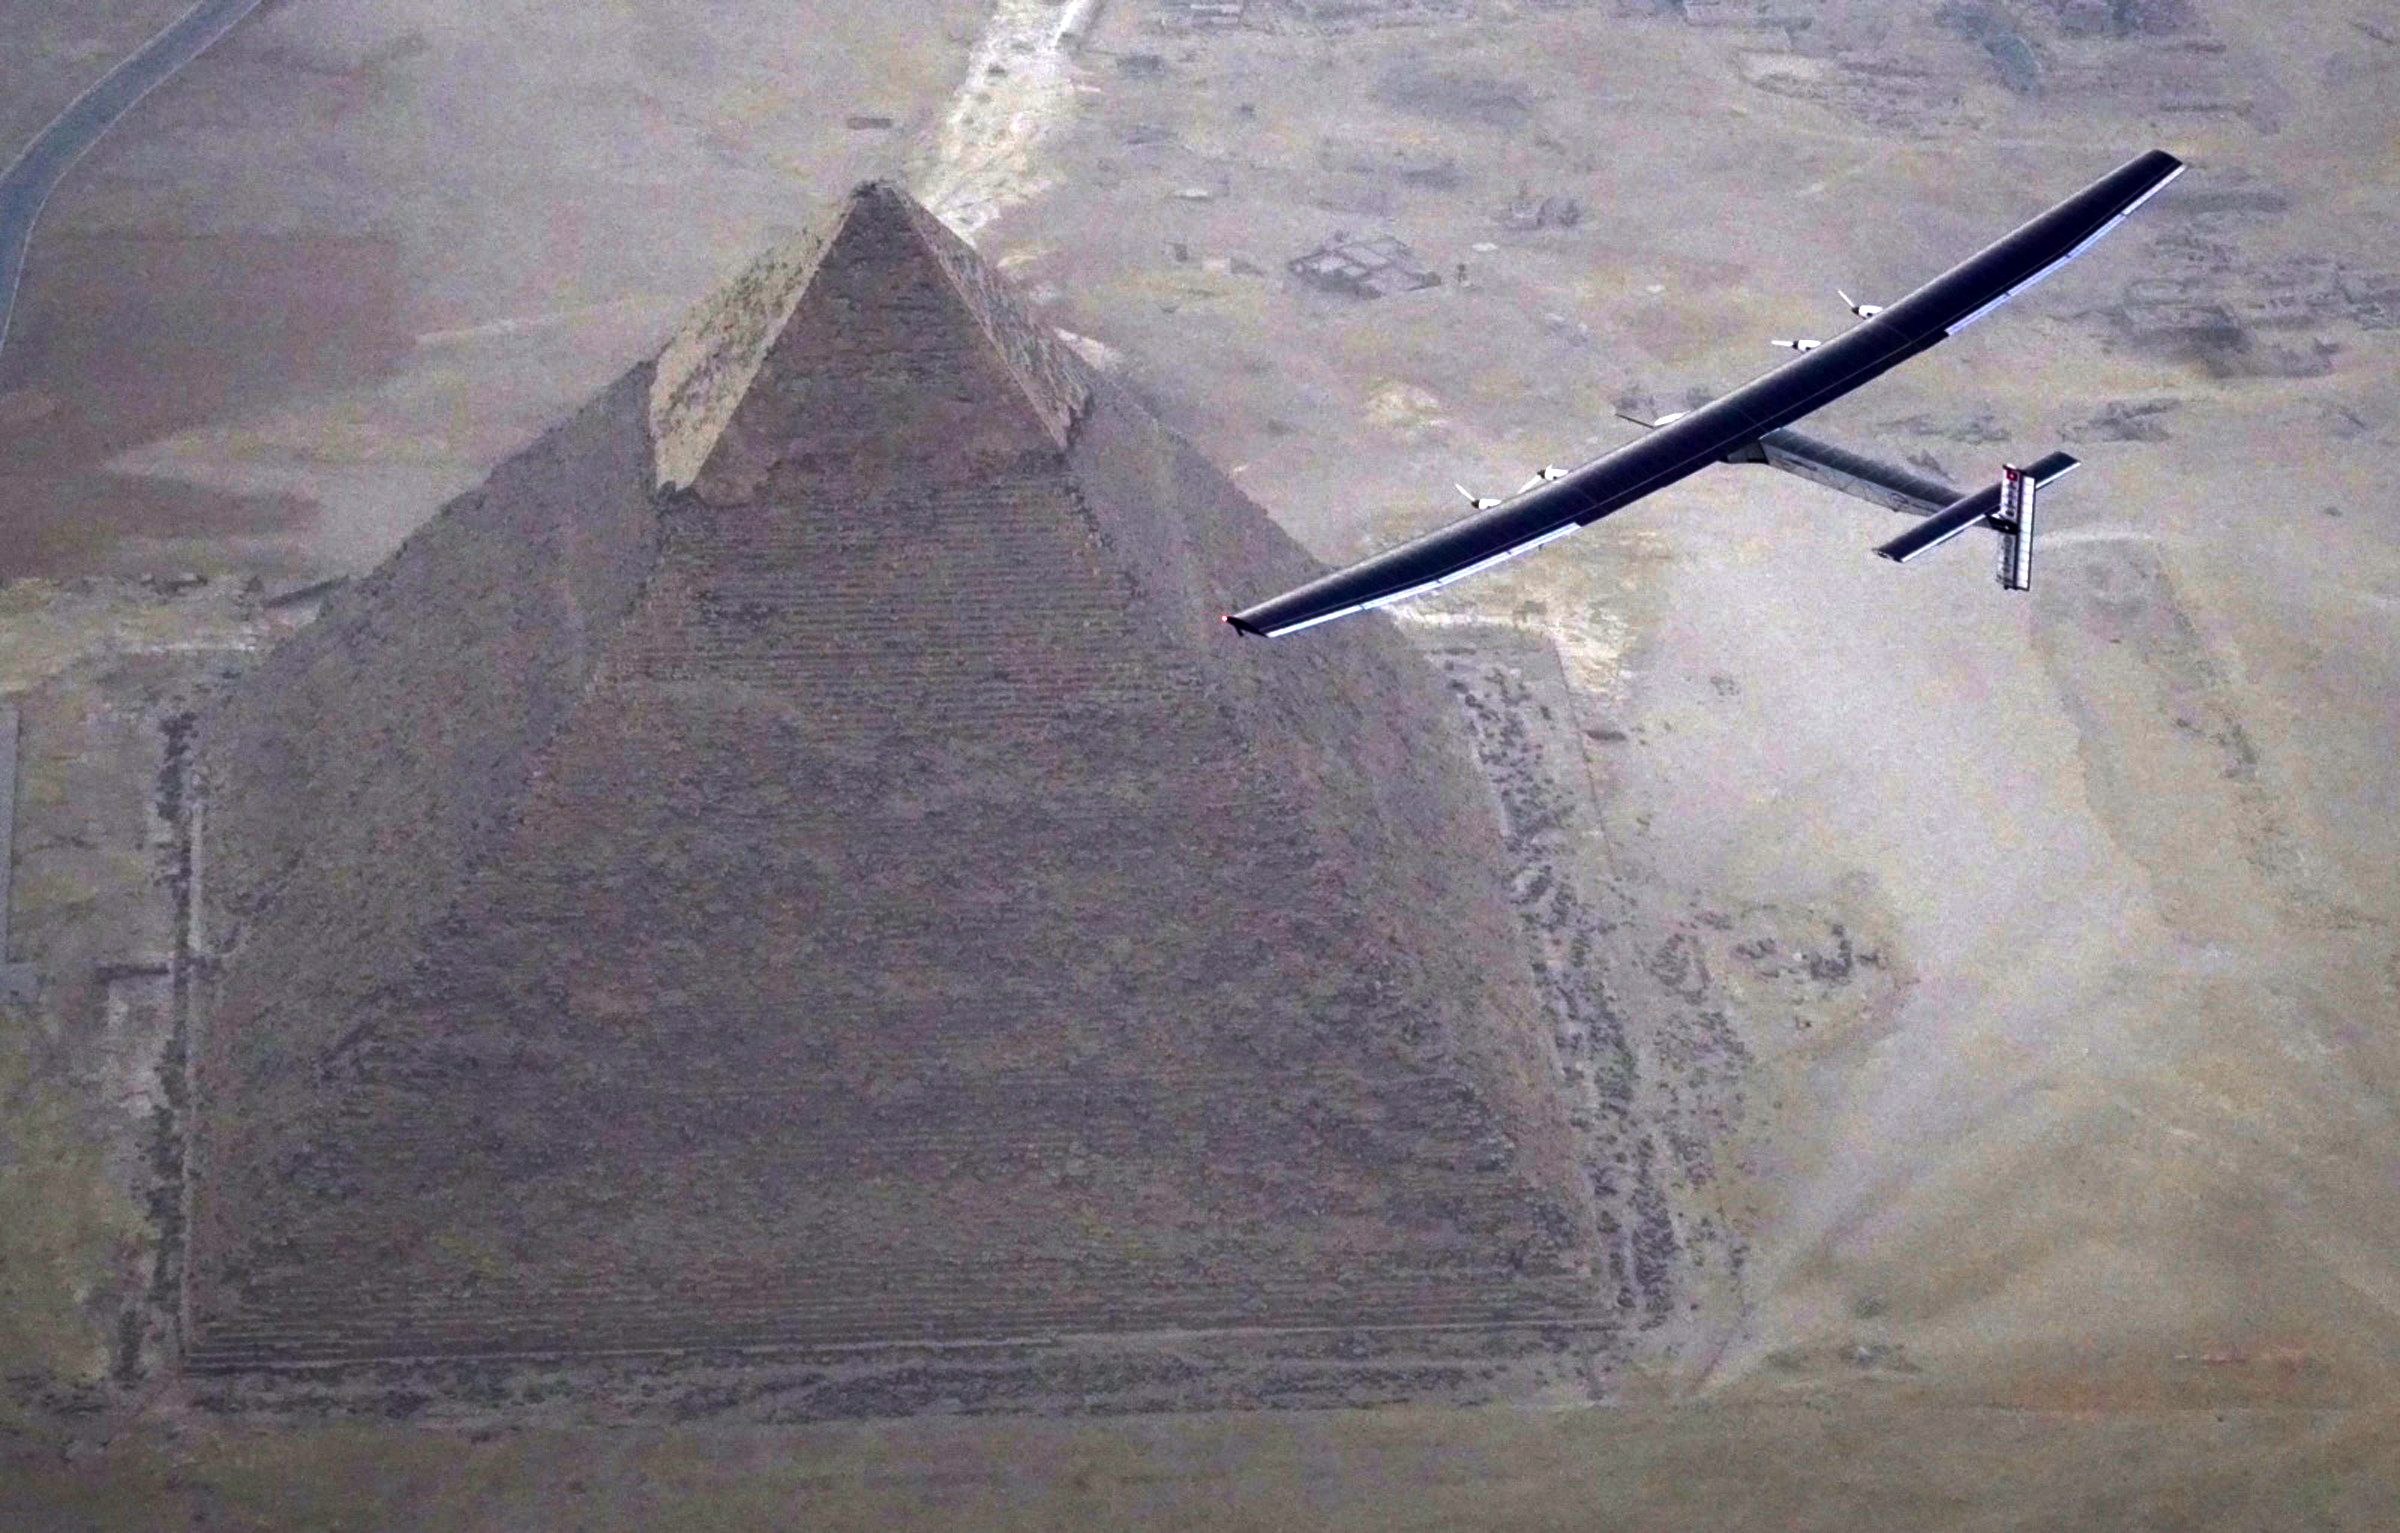 Solar Impulse 2, the solar powered plane, piloted by Swiss pioneer André Borschberg, is seen during the flyover of the pyramids of Giza on July 13, 2016 prior to landing in Cairo, Egypt. The 16th leg of the round-the-world-trip from Seville in Spain covered a distance of 3,700 kilometers and took almost 49 hours. The Solar Impulse 2 landed in Cairo on July 13, 2016  for the penultimate stop in the solar-powered plane's world tour, two days after setting off from Spain. The 16th leg of the round-the-world-trip from Seville in Spain covered a distance of 3,700 kilometers and took almost 49 hours. / AFP PHOTO / Solar Impulse 2 / Jean Revillard / XGTY  == RESTRICTED TO EDITORIAL USE  / MANDATORY CREDIT:  "AFP PHOTO / SOLAR IMPULSE 2 / Jean Revillard" / NO MARKETING / NO ADVERTISING CAMPAIGNS /  DISTRIBUTED AS A SERVICE TO CLIENTS  ==